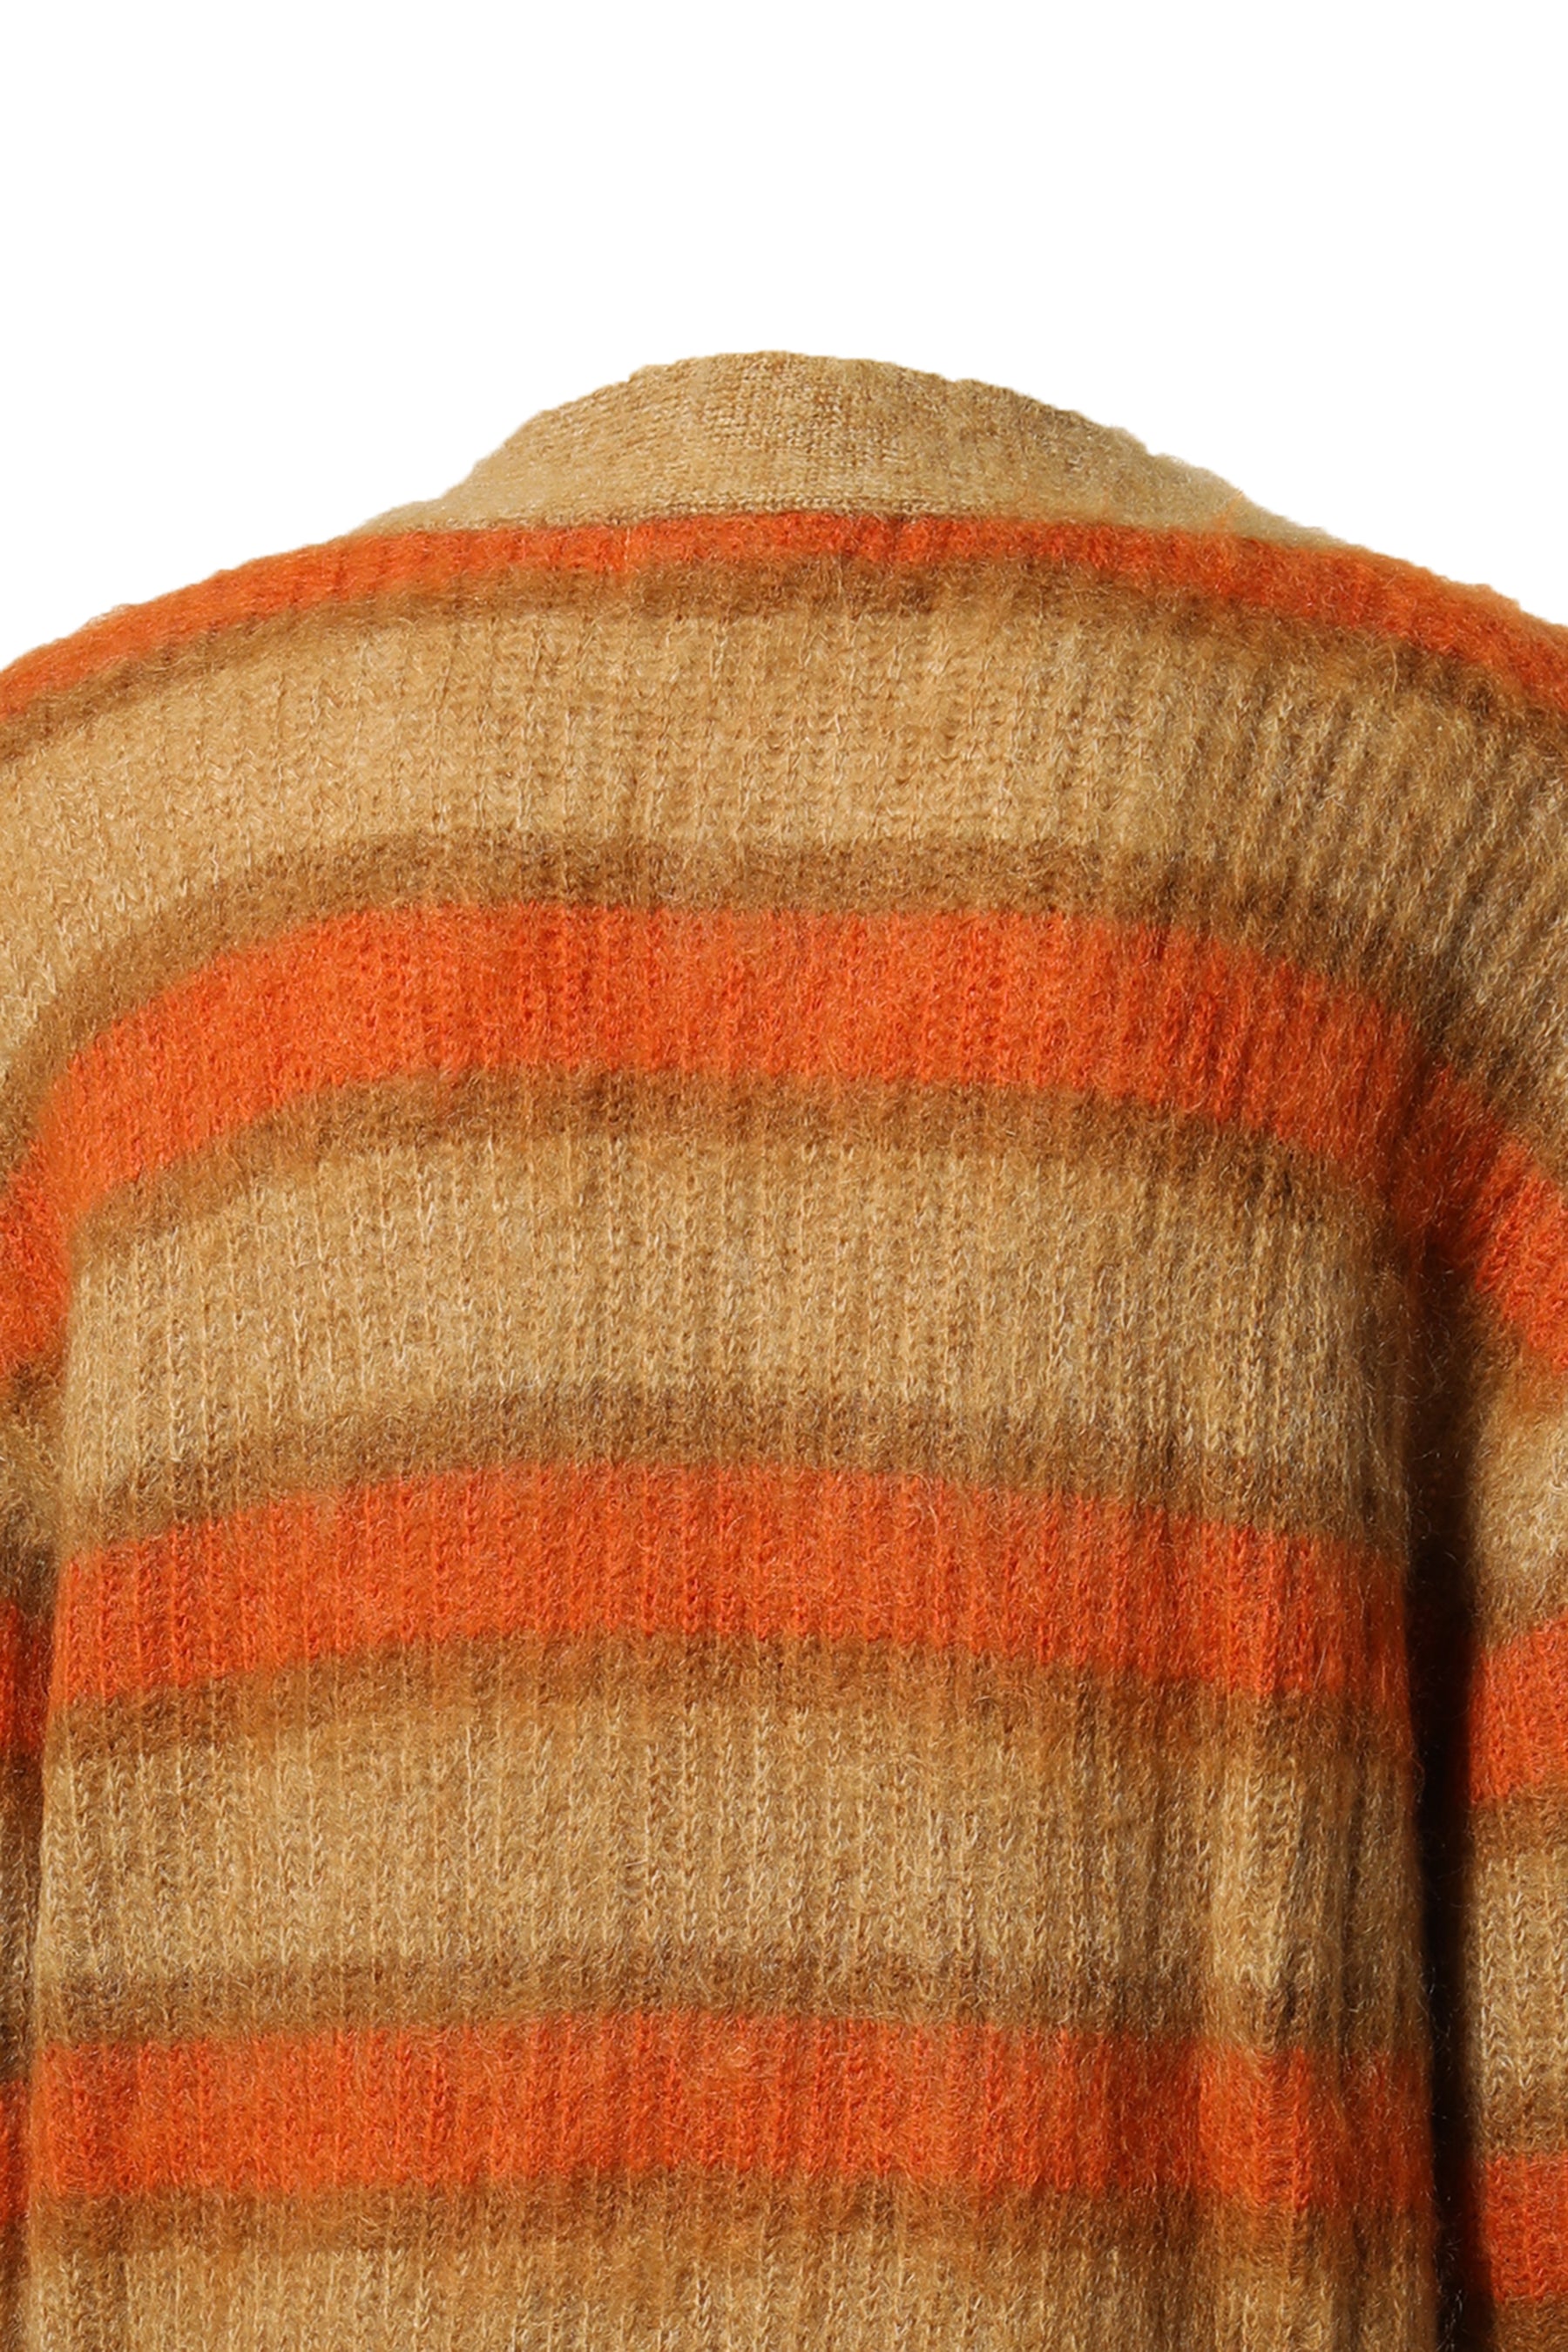 DISCOVERED ディスカバード FW22 MOHAIR BORDER KNIT CARDIGAN / BEI ...